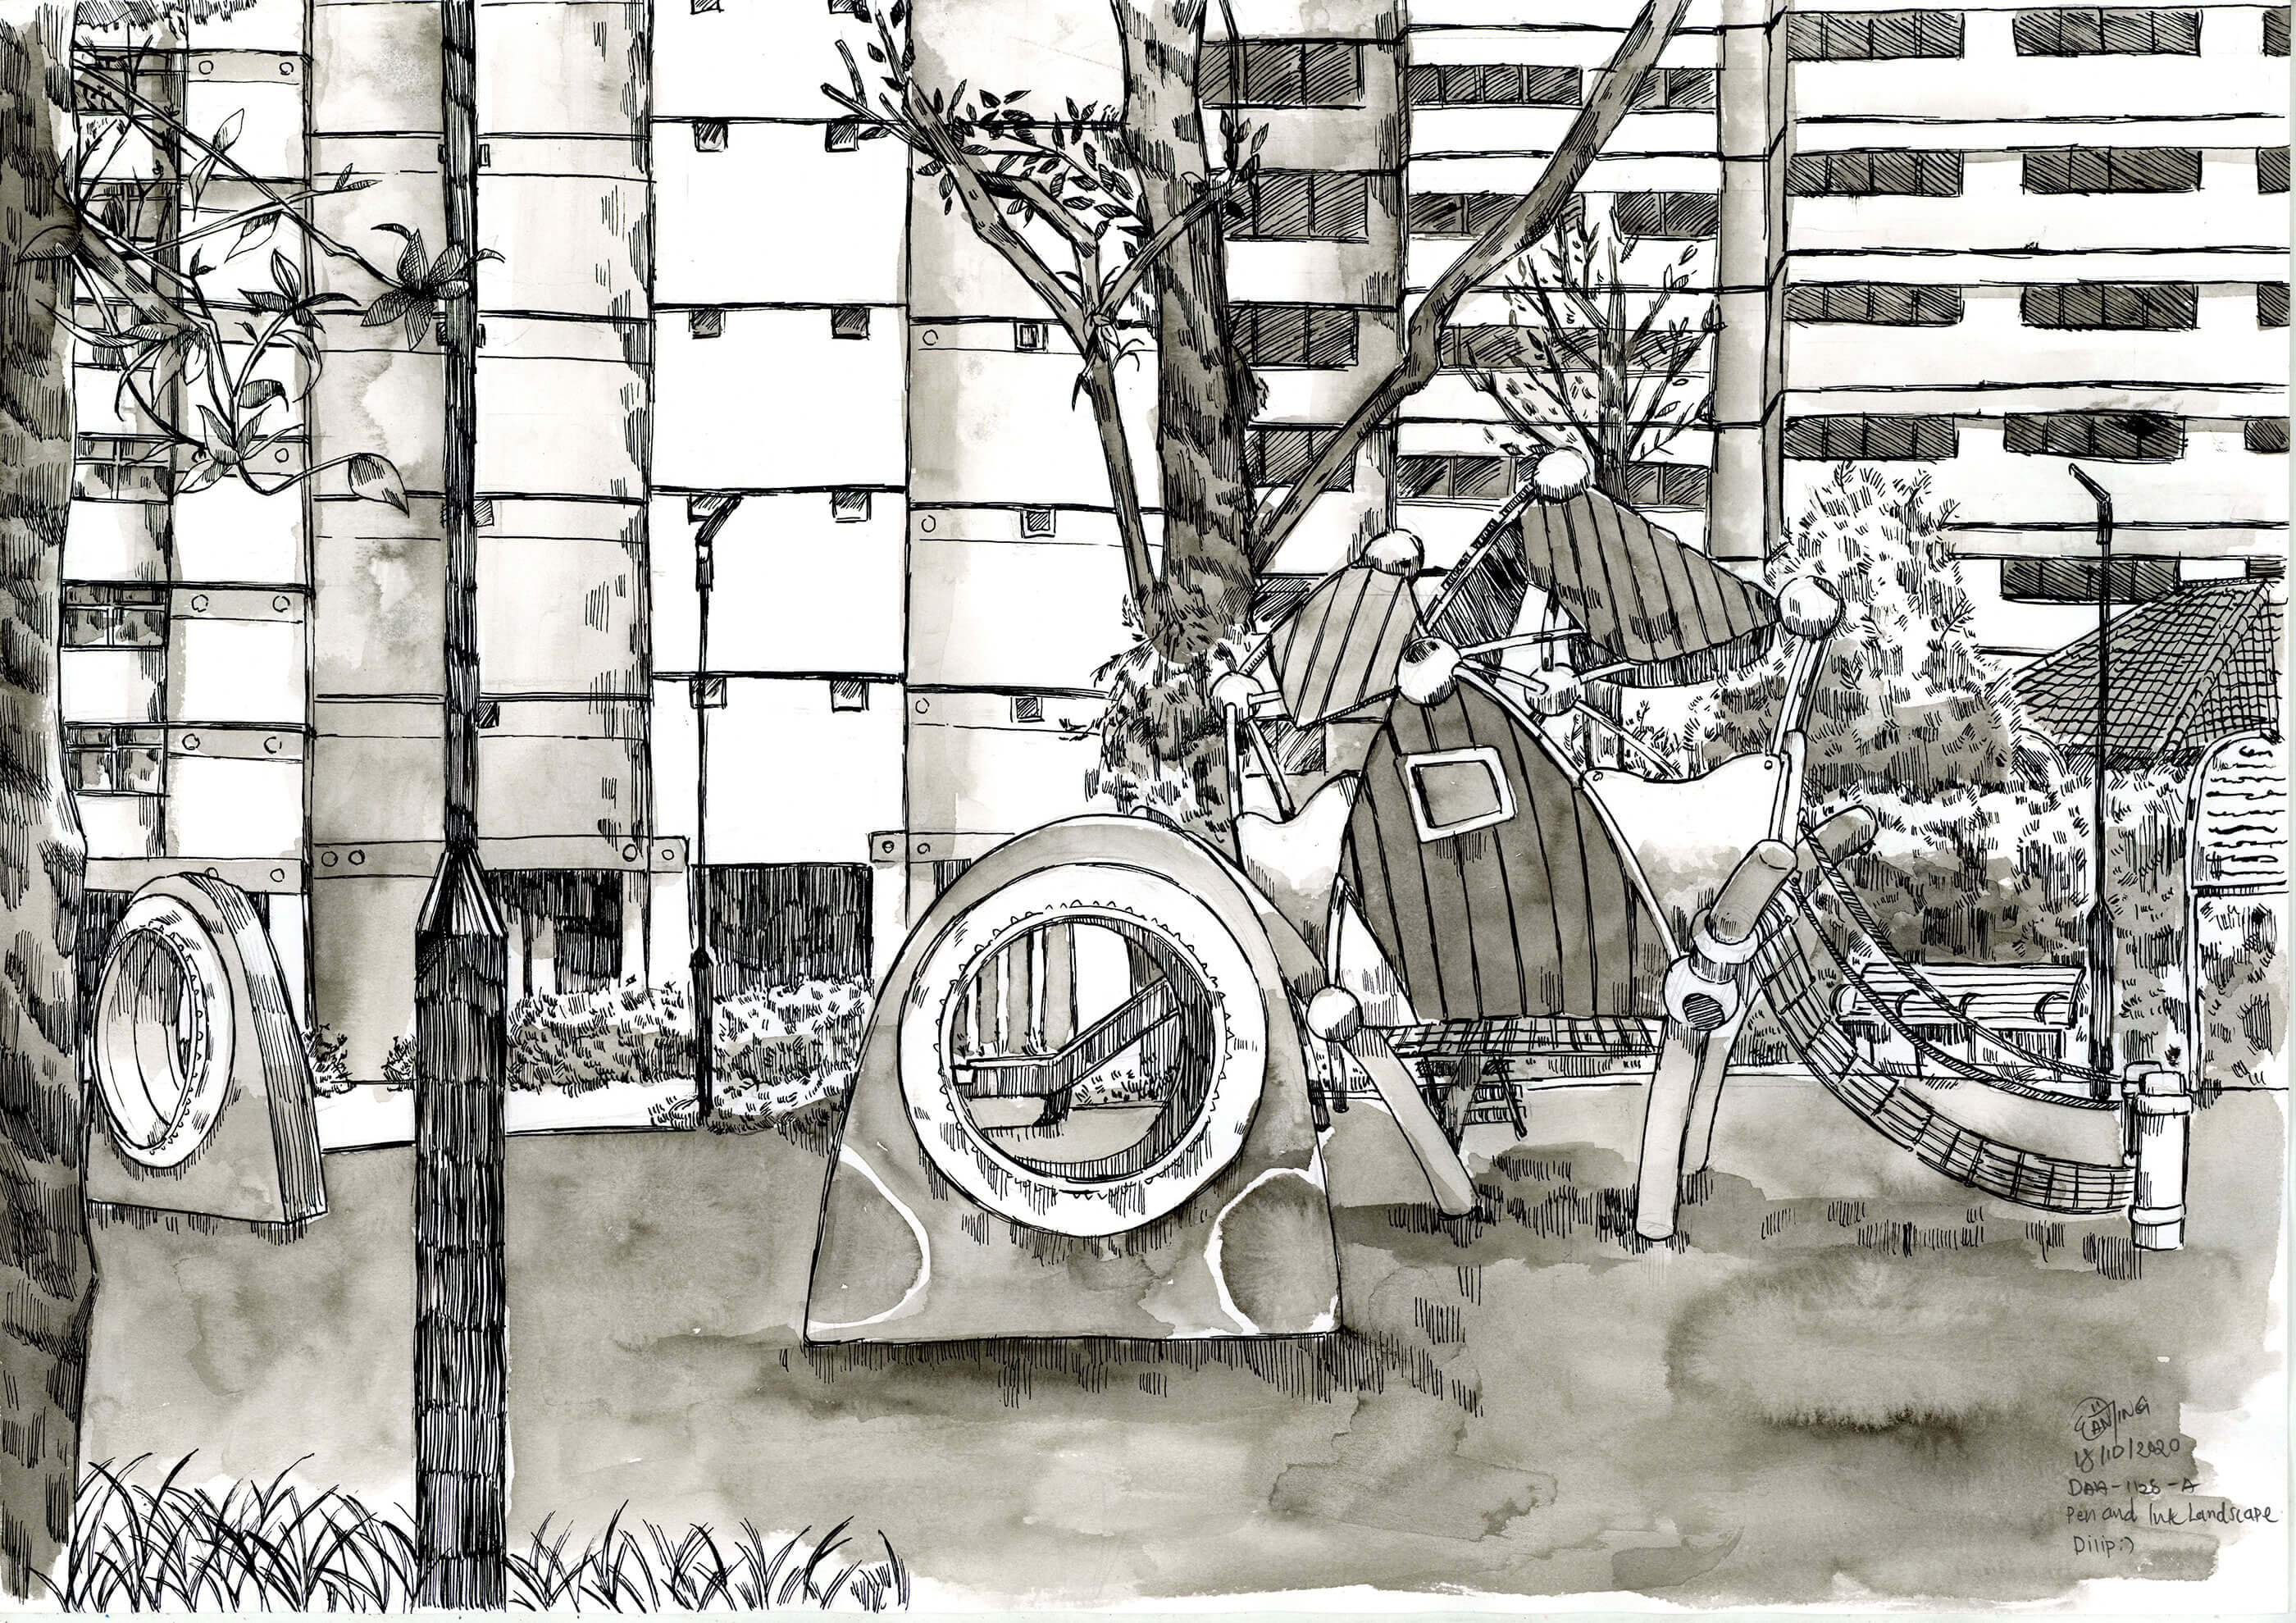 Black-and-White sketch of a playground near high-rise apartments.